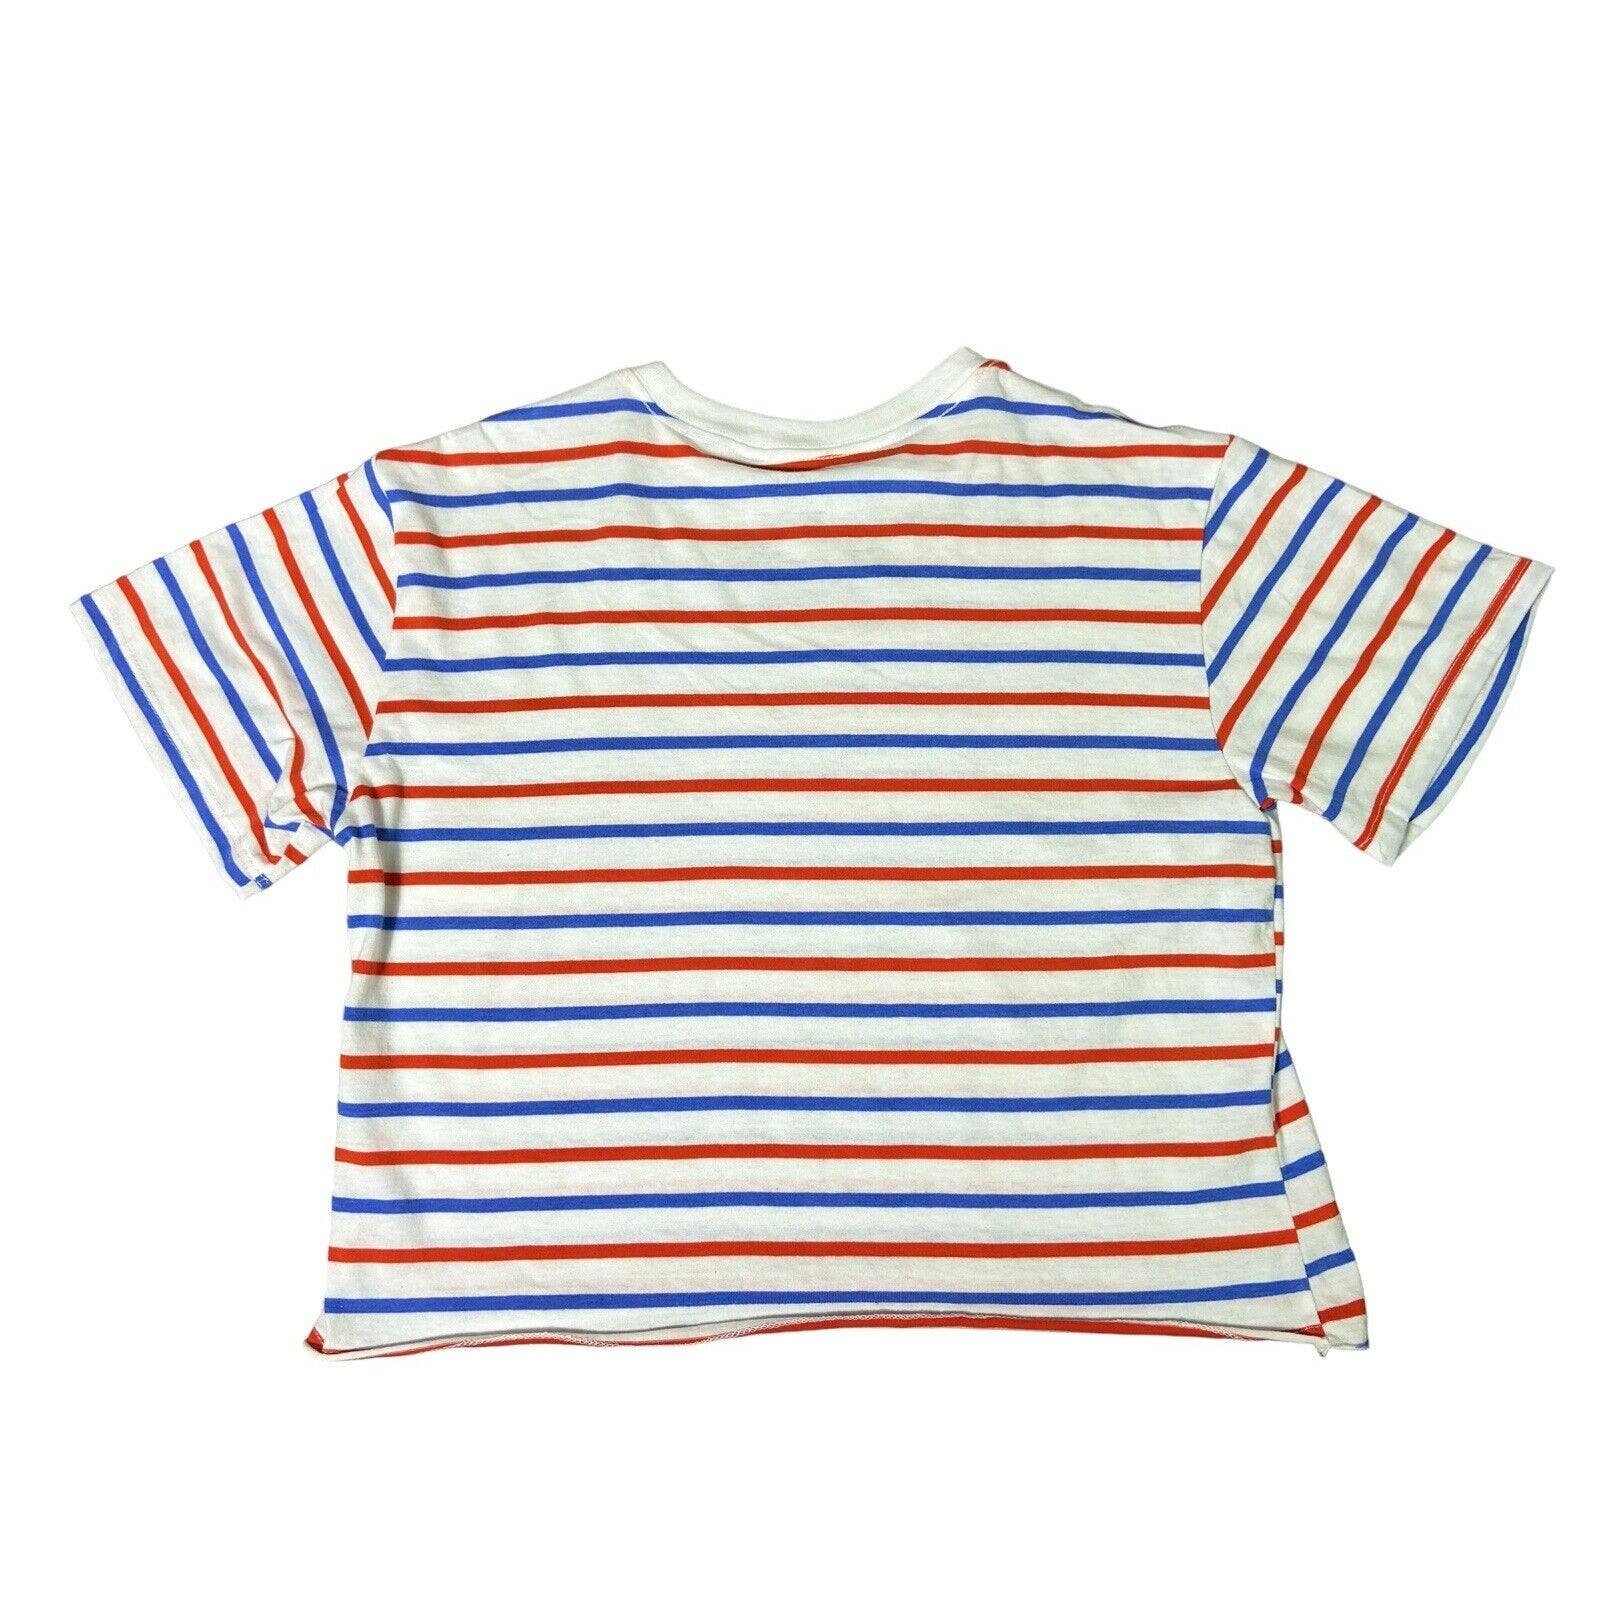 where to buy  Mighty Fine Striped USA Graphic Women´s Crop Top Red & Blue Stripes Size Large hVgygH2D1 Novel 